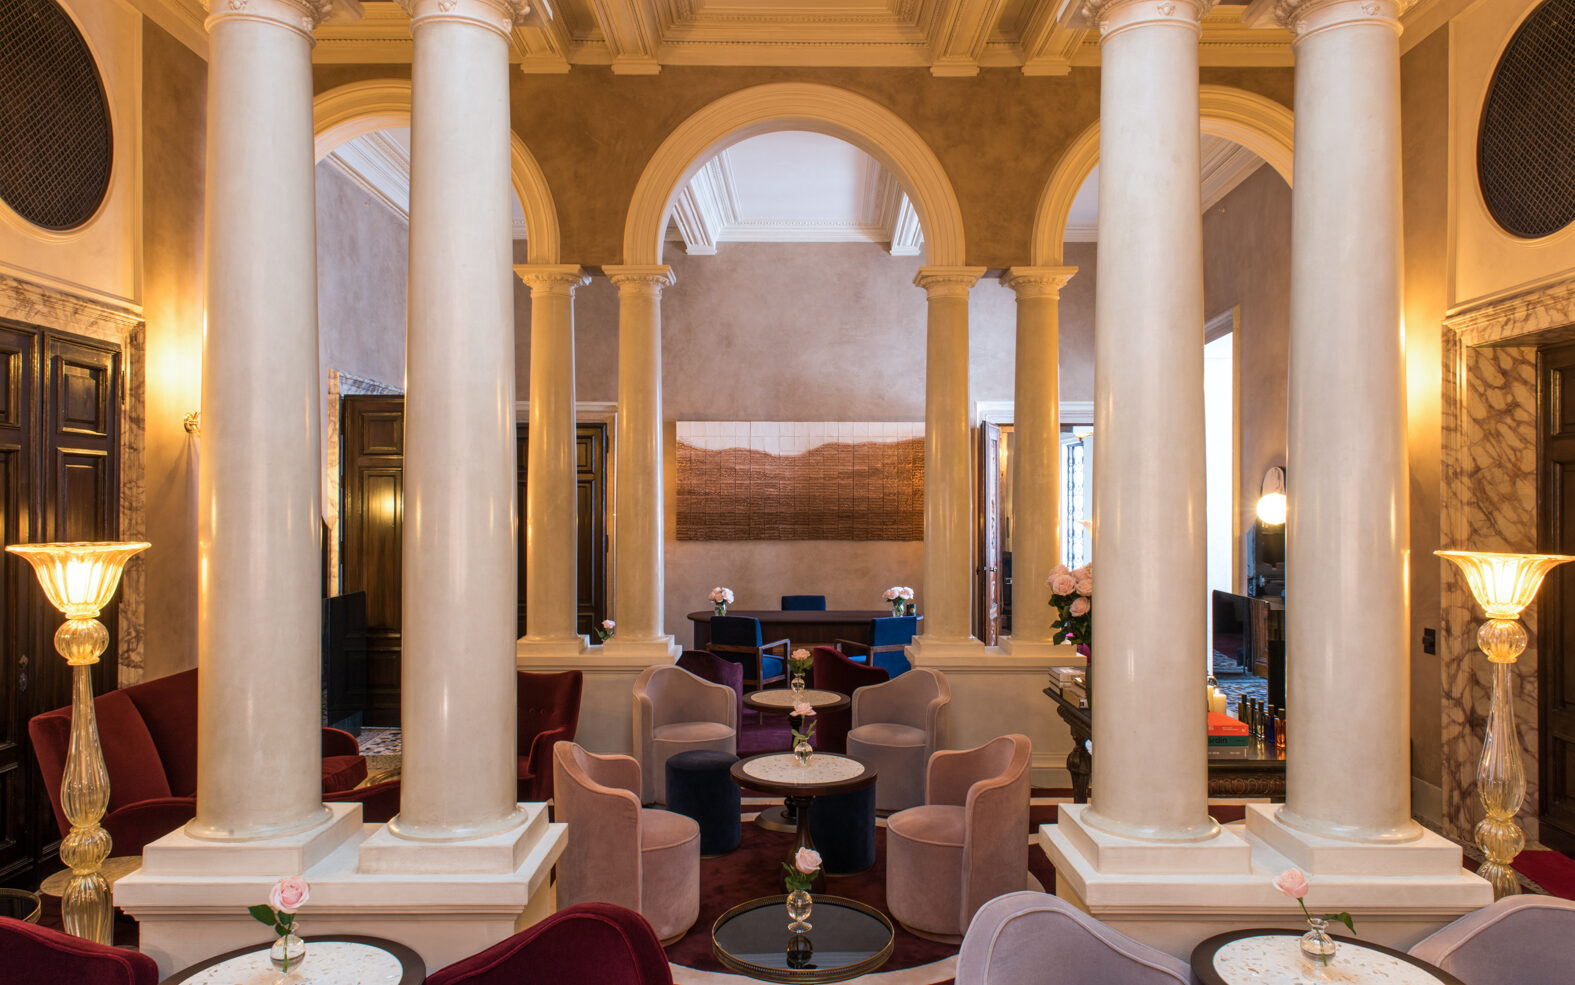 This Stylish Venice Hotel Resides within the Historic Former Stock Exchange Building